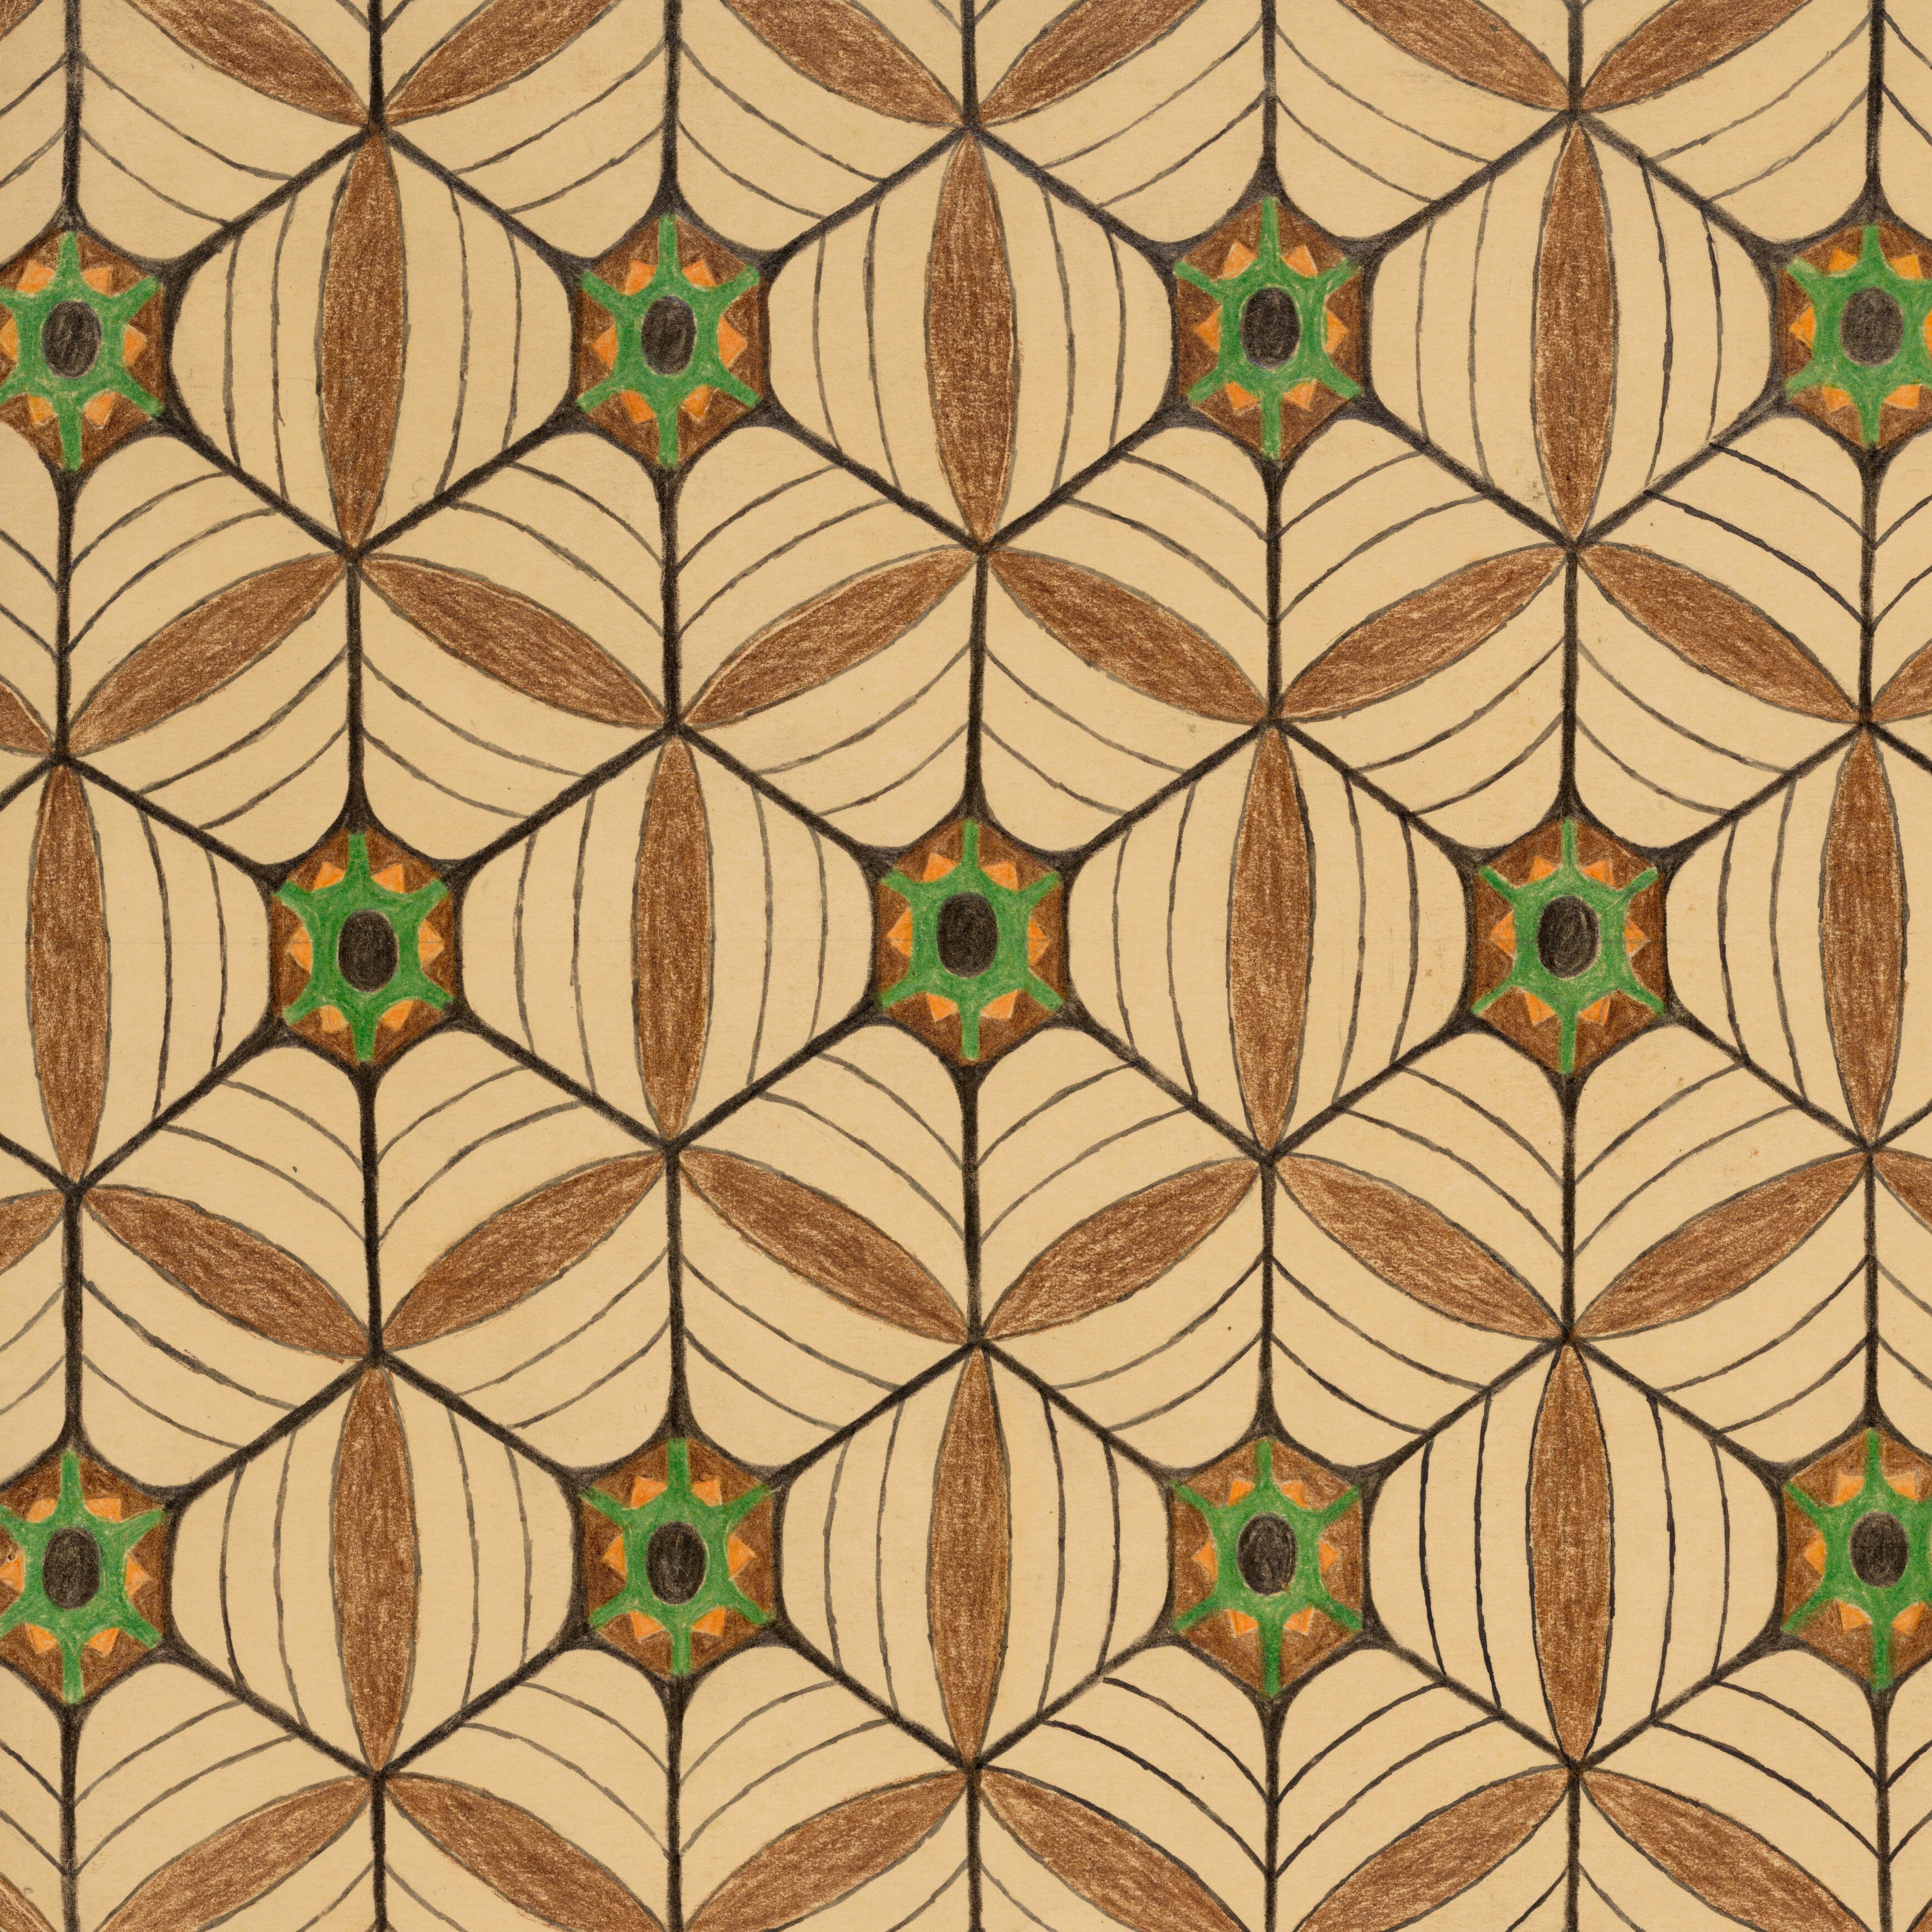 A detailed geometric tile pattern featuring leaf-like shapes in tan and white hues with green and brown accents creating a repetitive, symmetrical design. elements form star and cross shapes at the intersections.